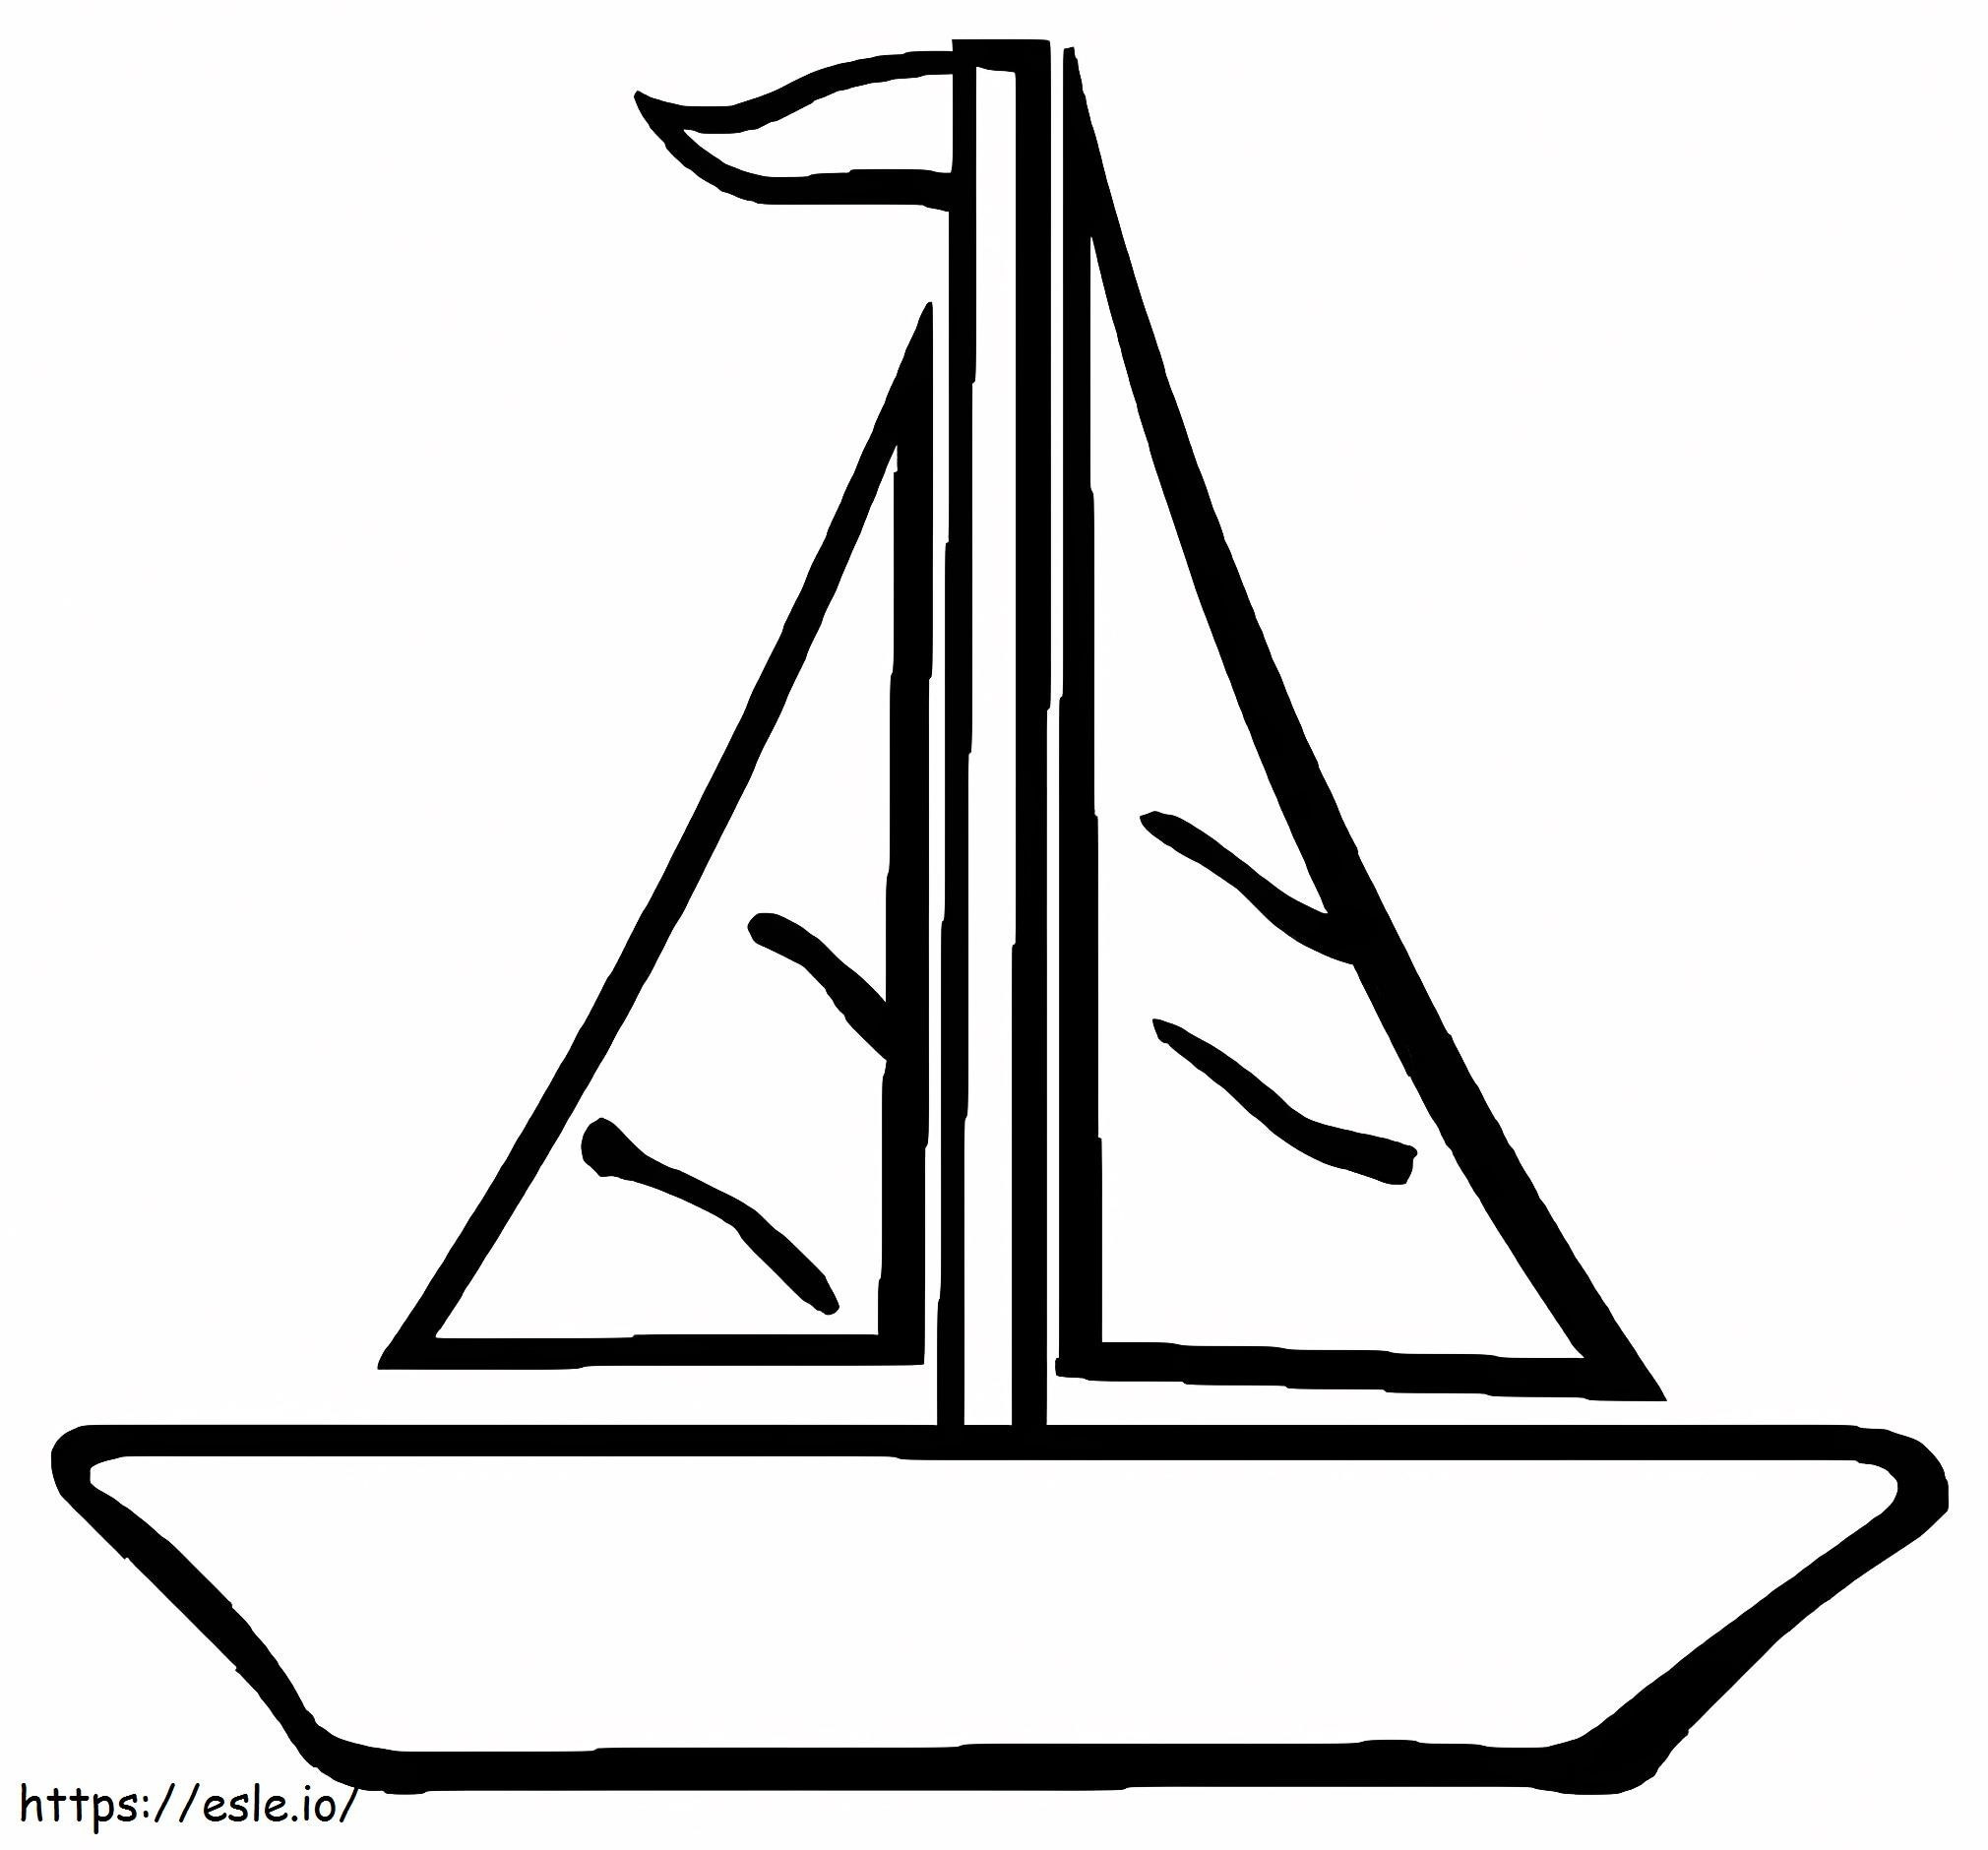 Simple Sailboat 1 coloring page